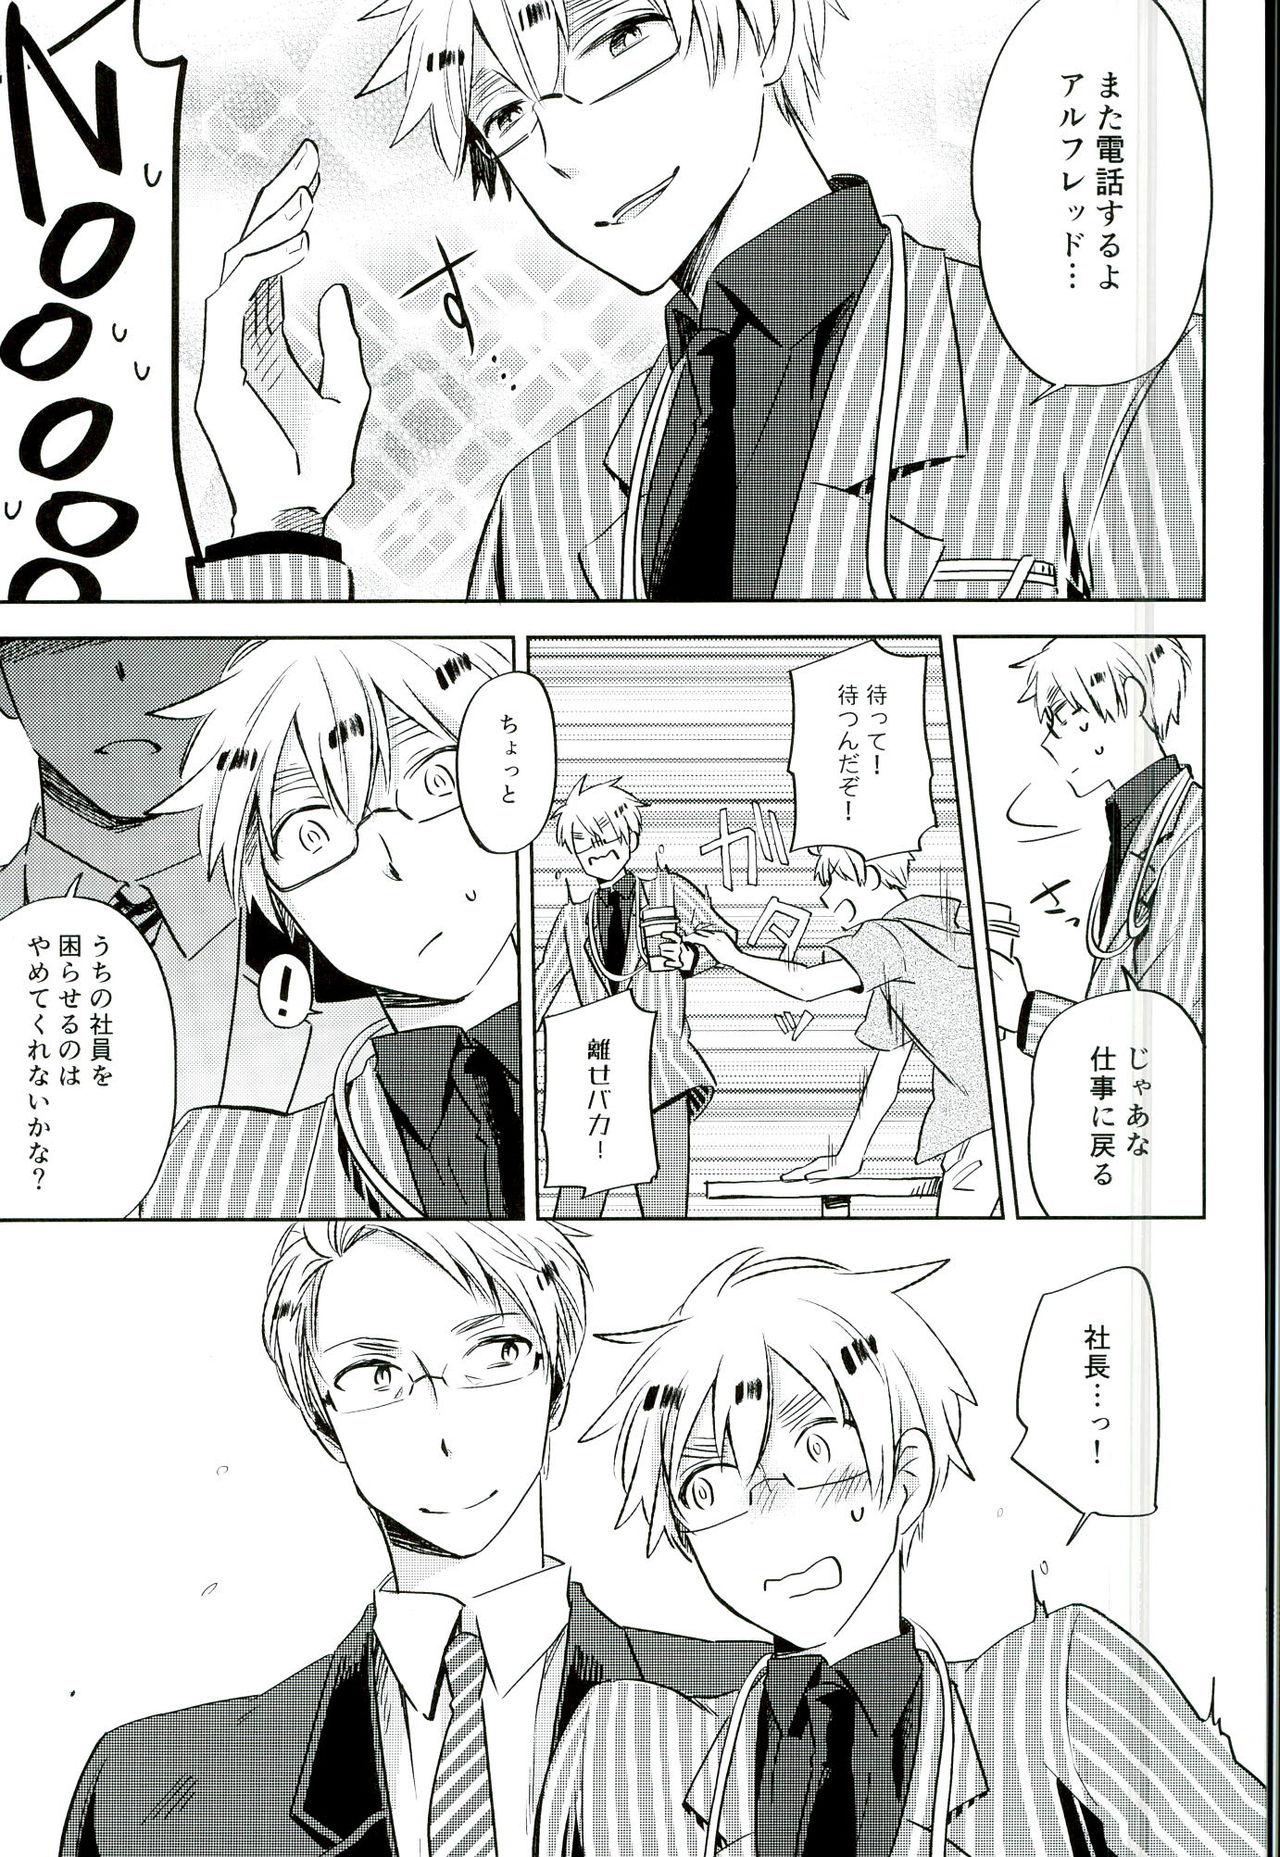 Black Ameagari no Slip Out - Axis powers hetalia Pussylicking - Page 58